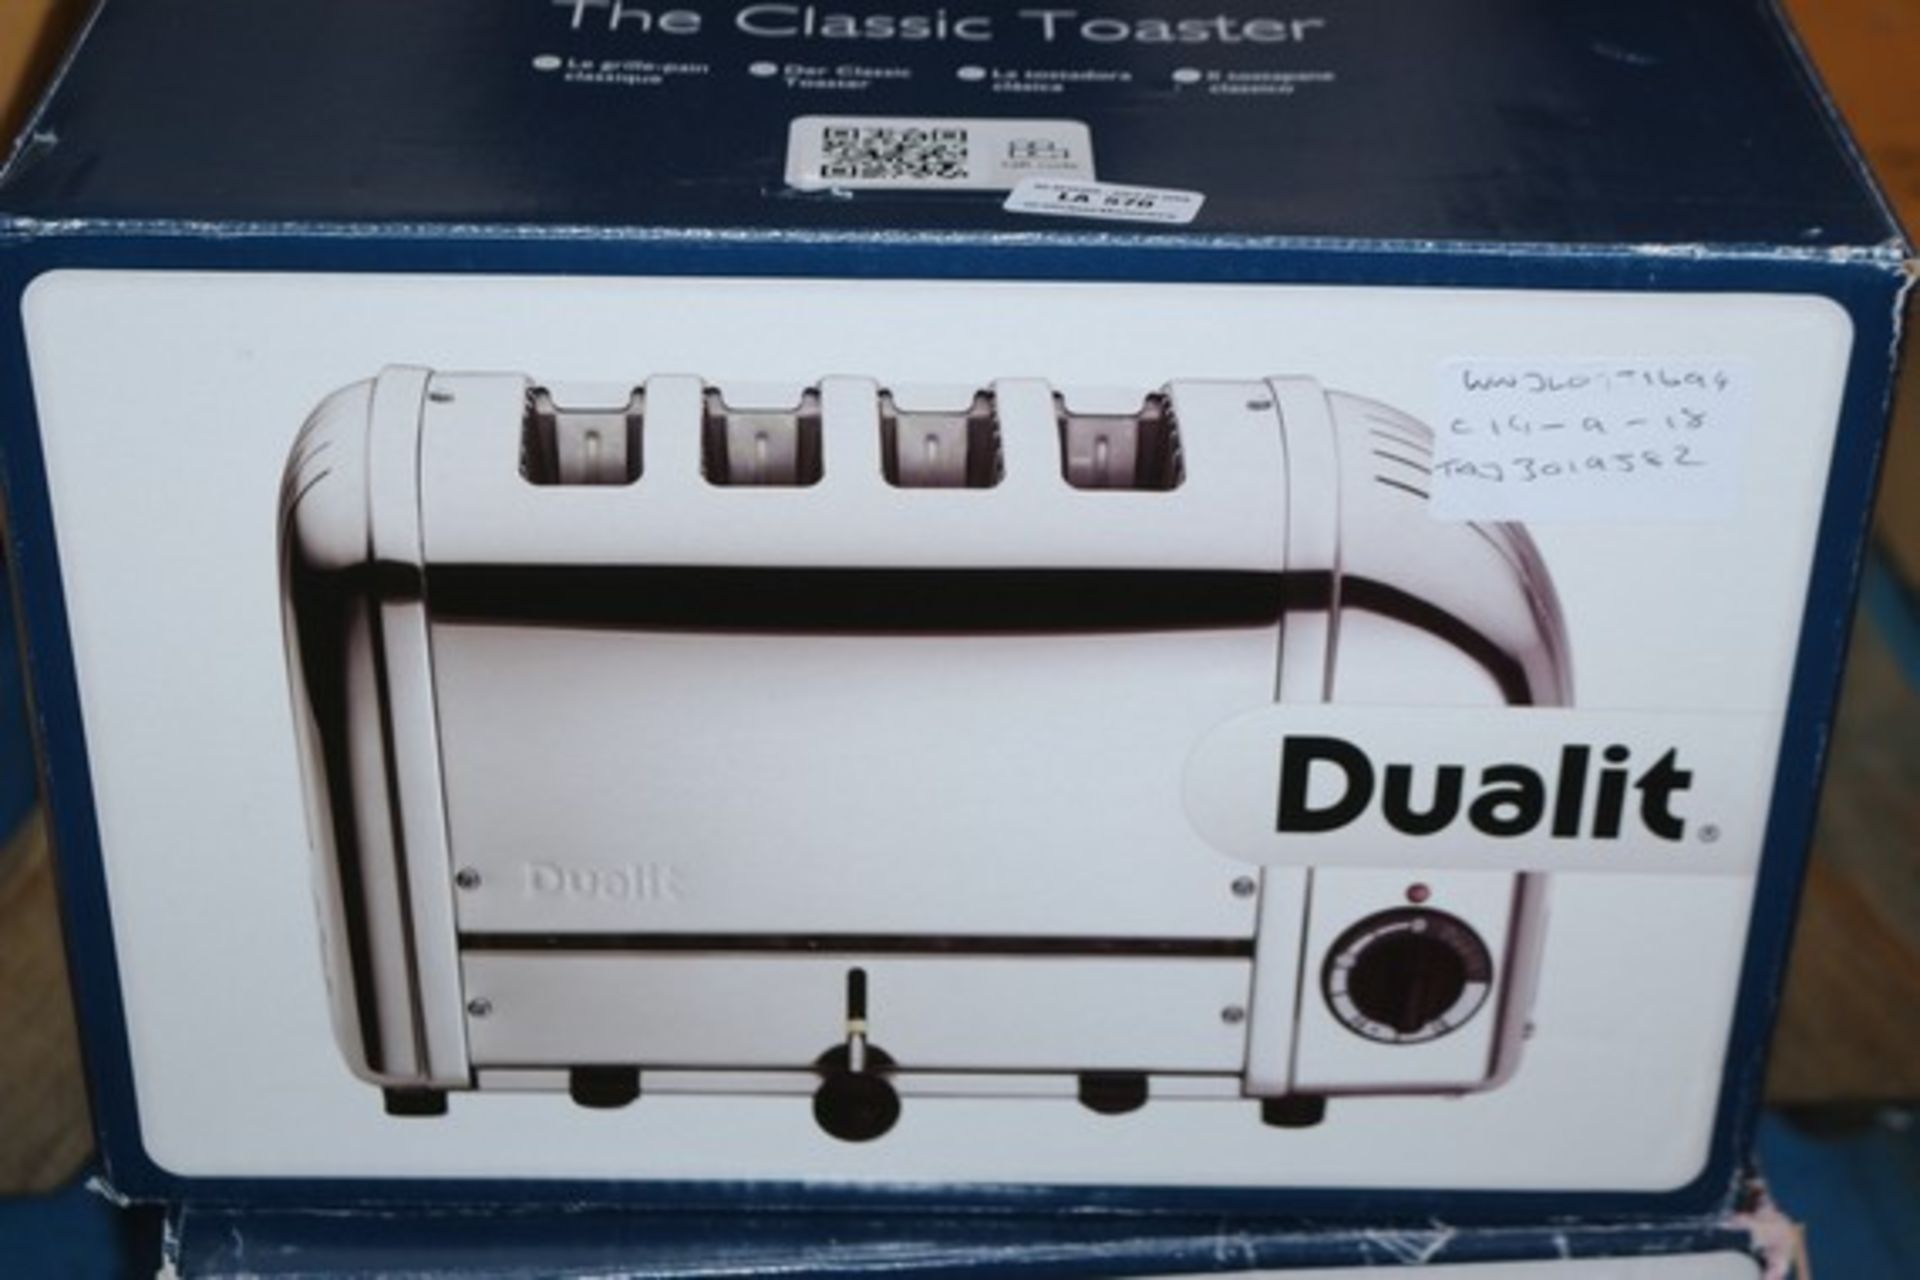 1 x DUALIT THE CLASSIC TOASTER (14.09.18) *PLEASE NOTE THAT THE BID PRICE IS MULTIPLIED BY THE